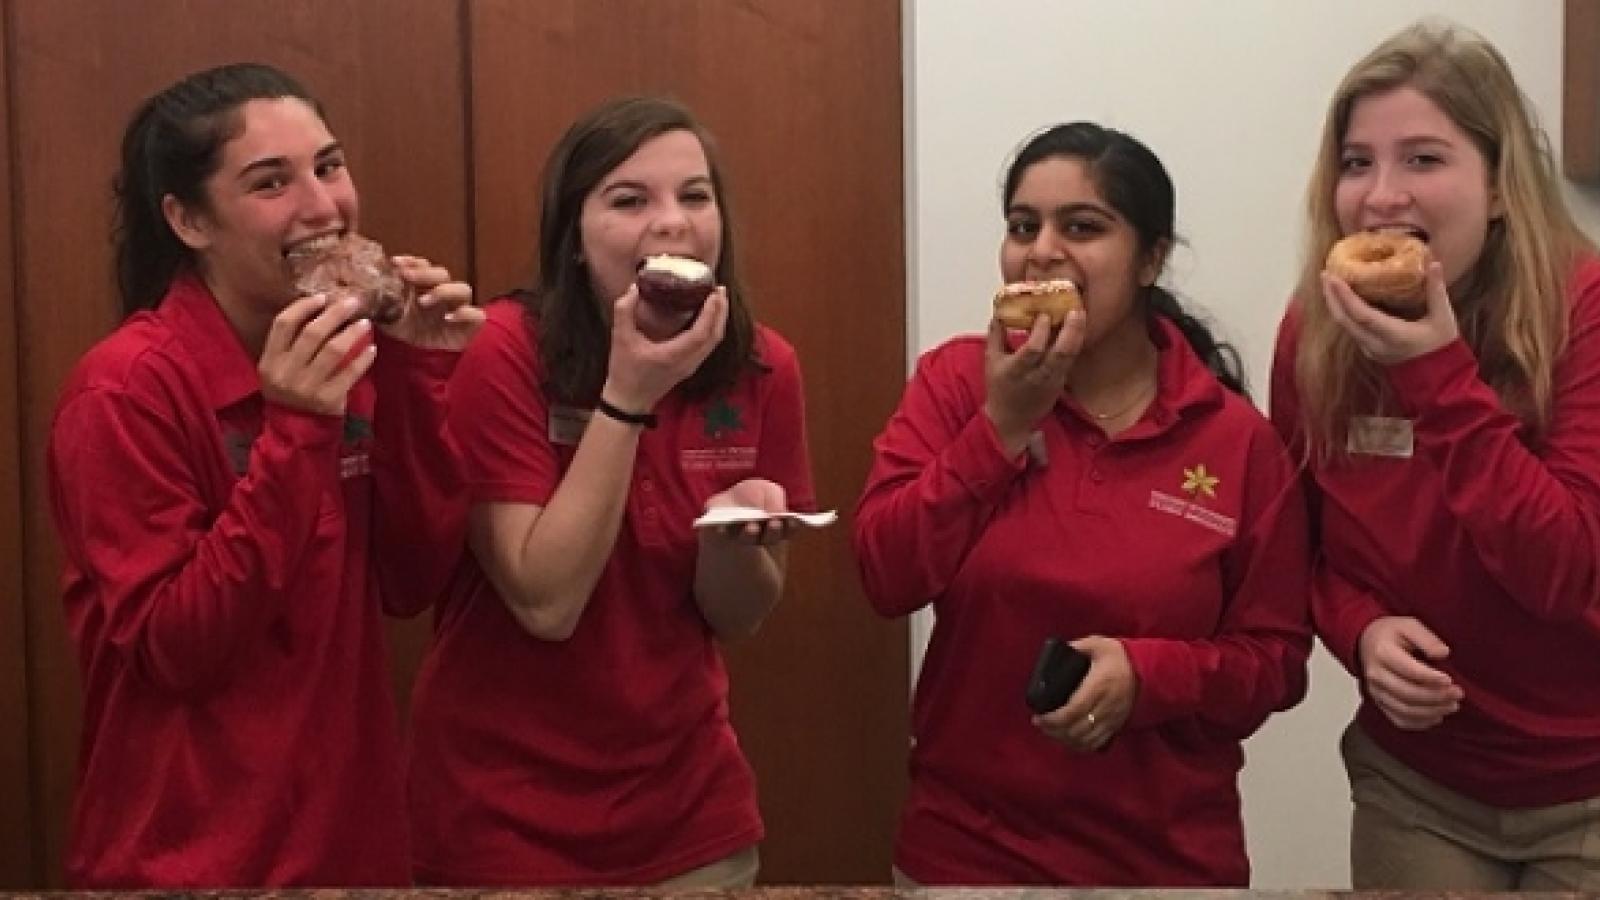 Students eating donuts